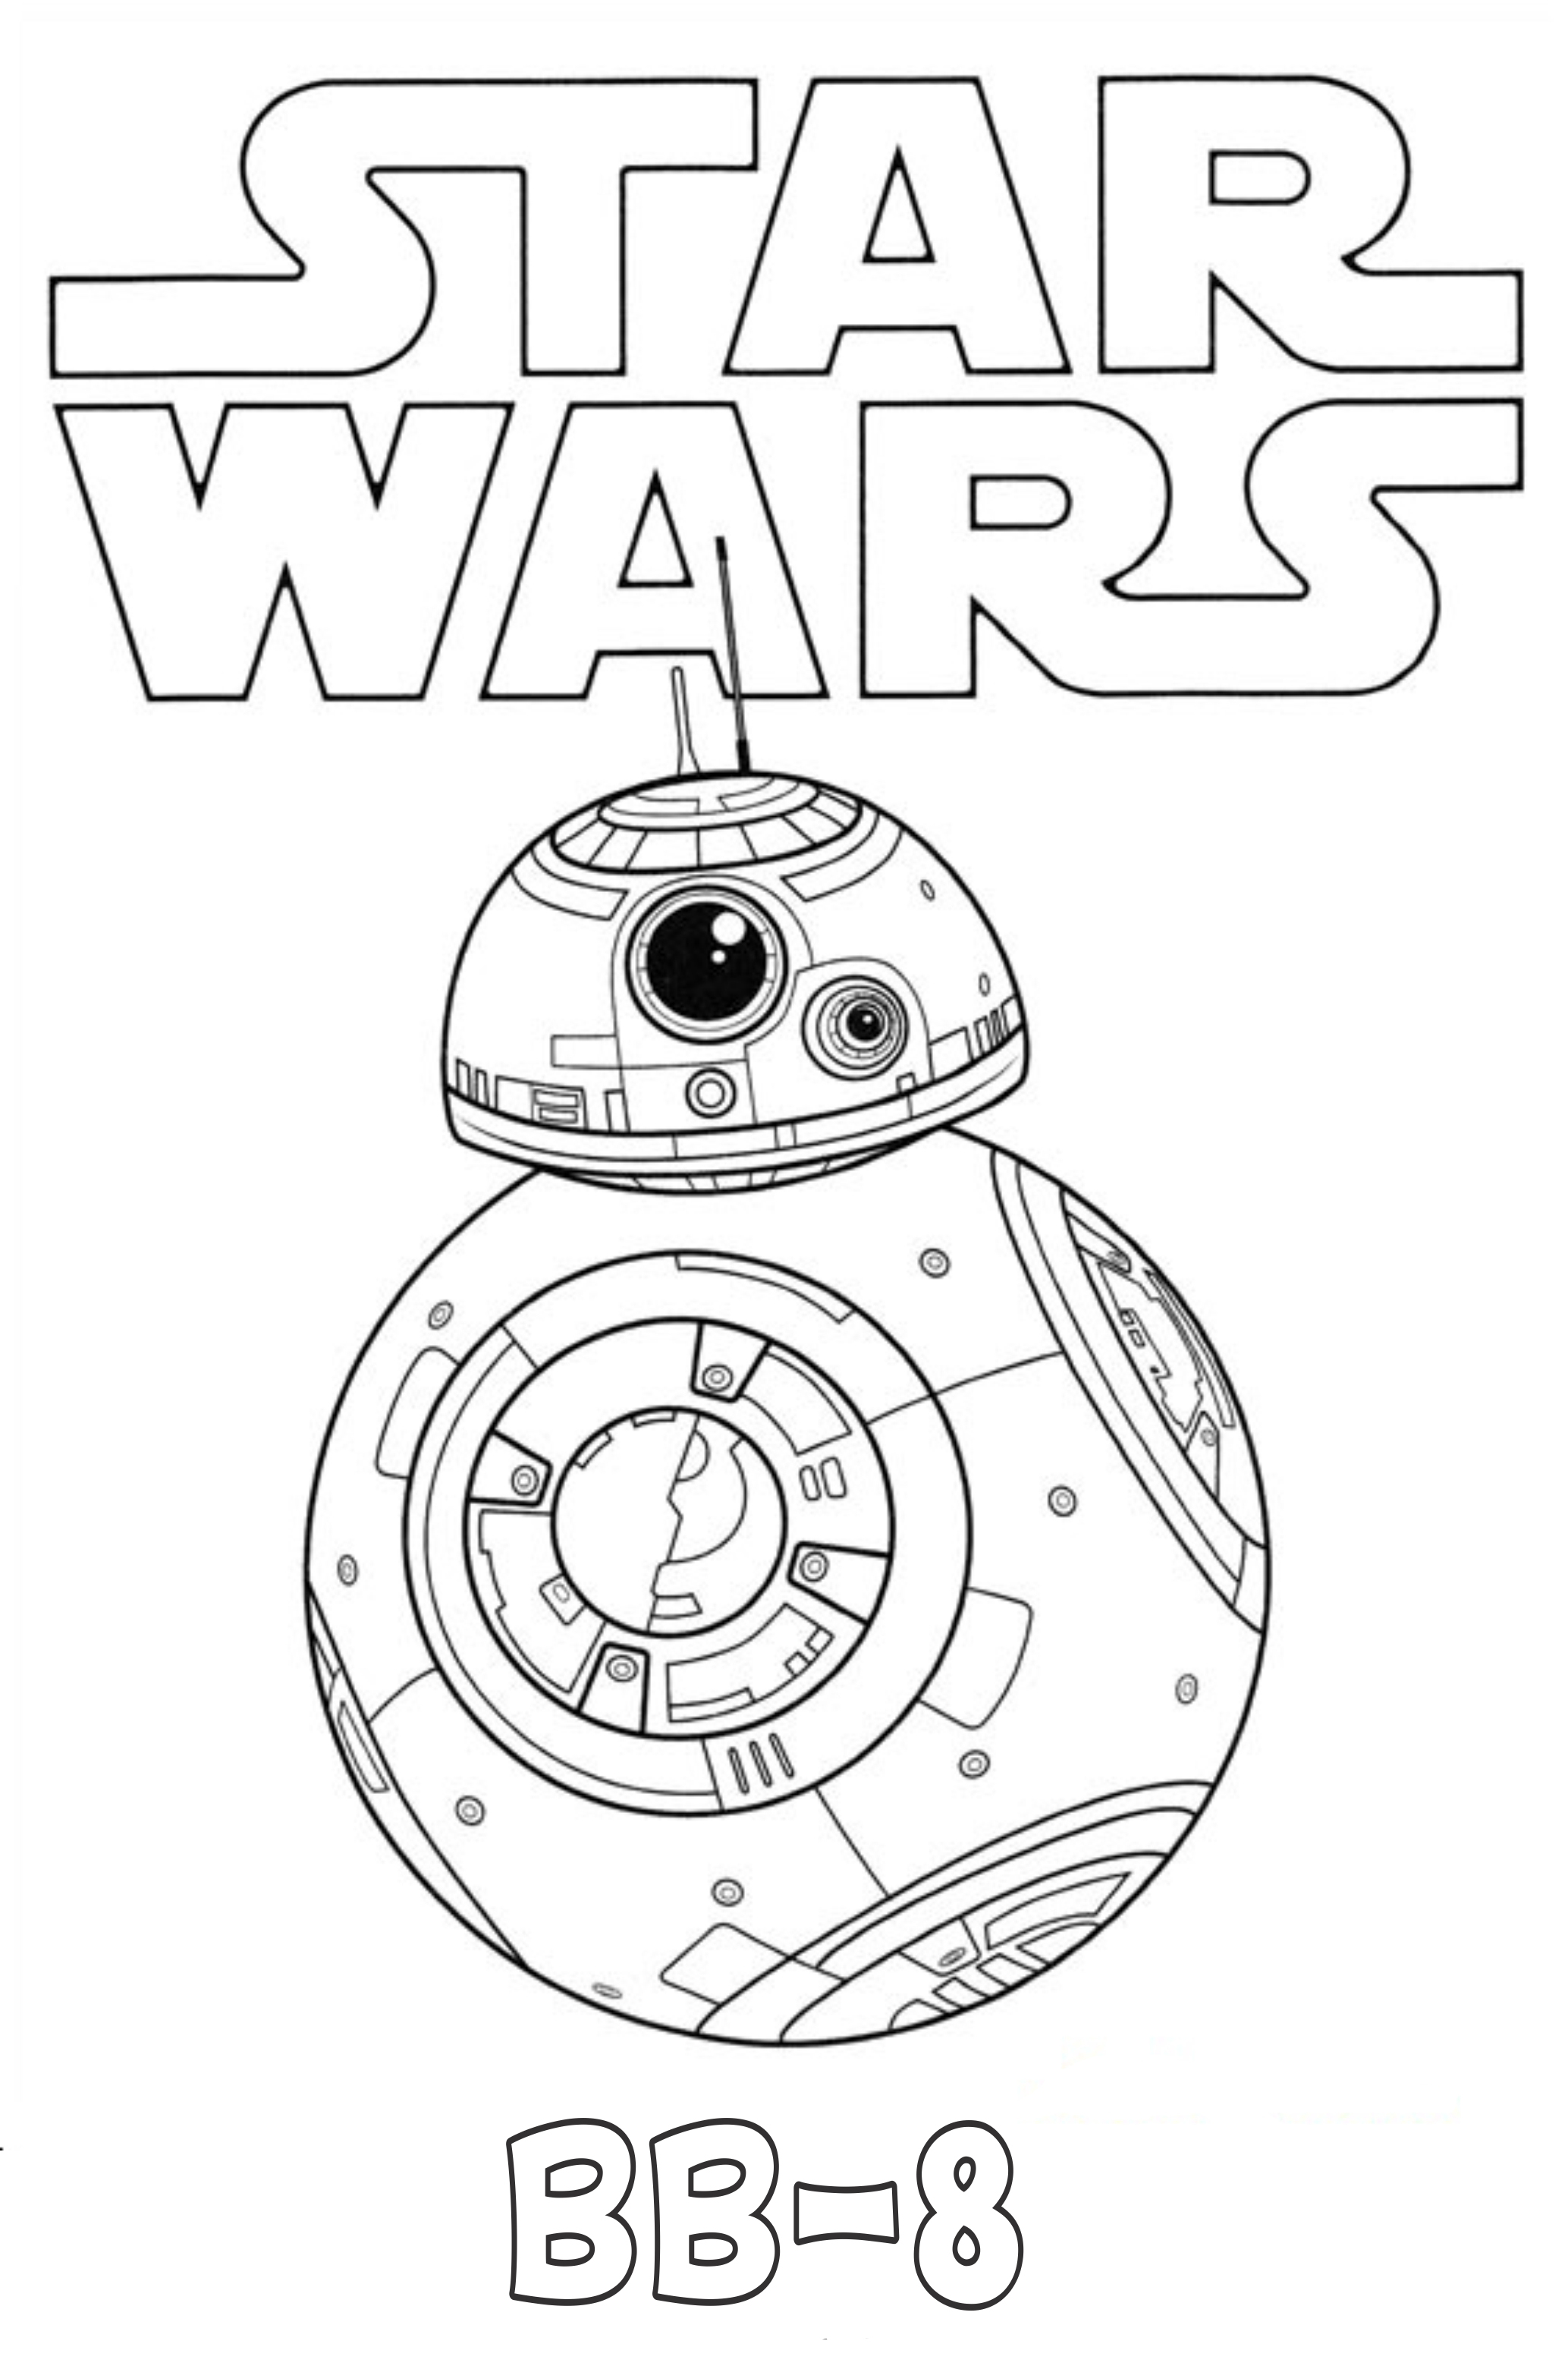 bb-8-coloring-pages-best-coloring-pages-for-kids